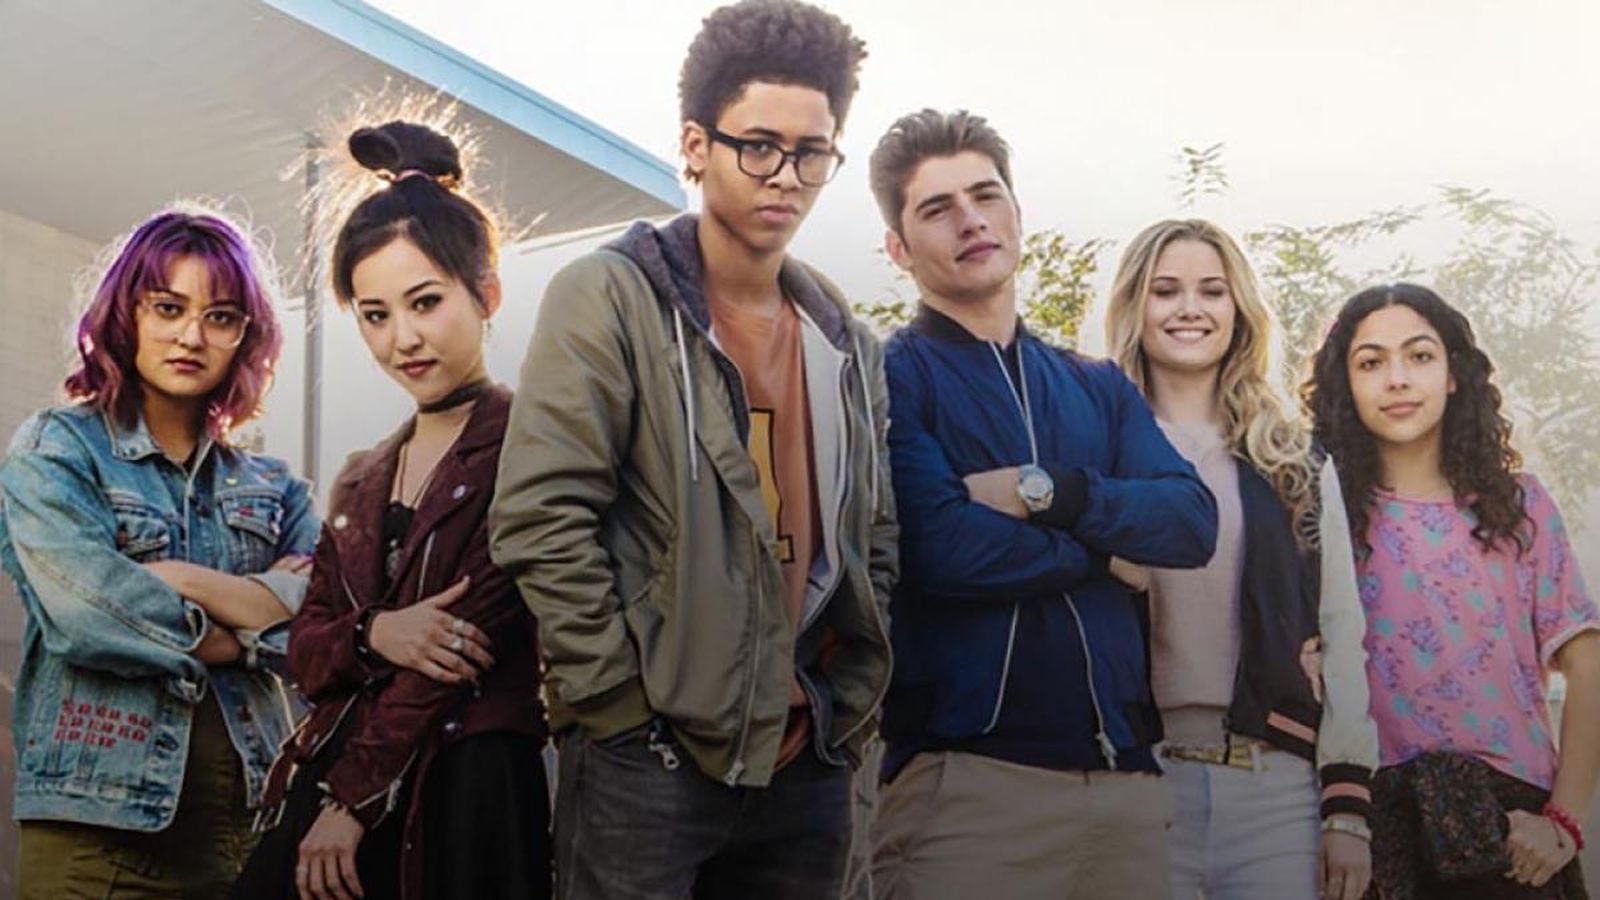 Runaways, the classic Marvel comic, is coming to Hulu. Here's what we know